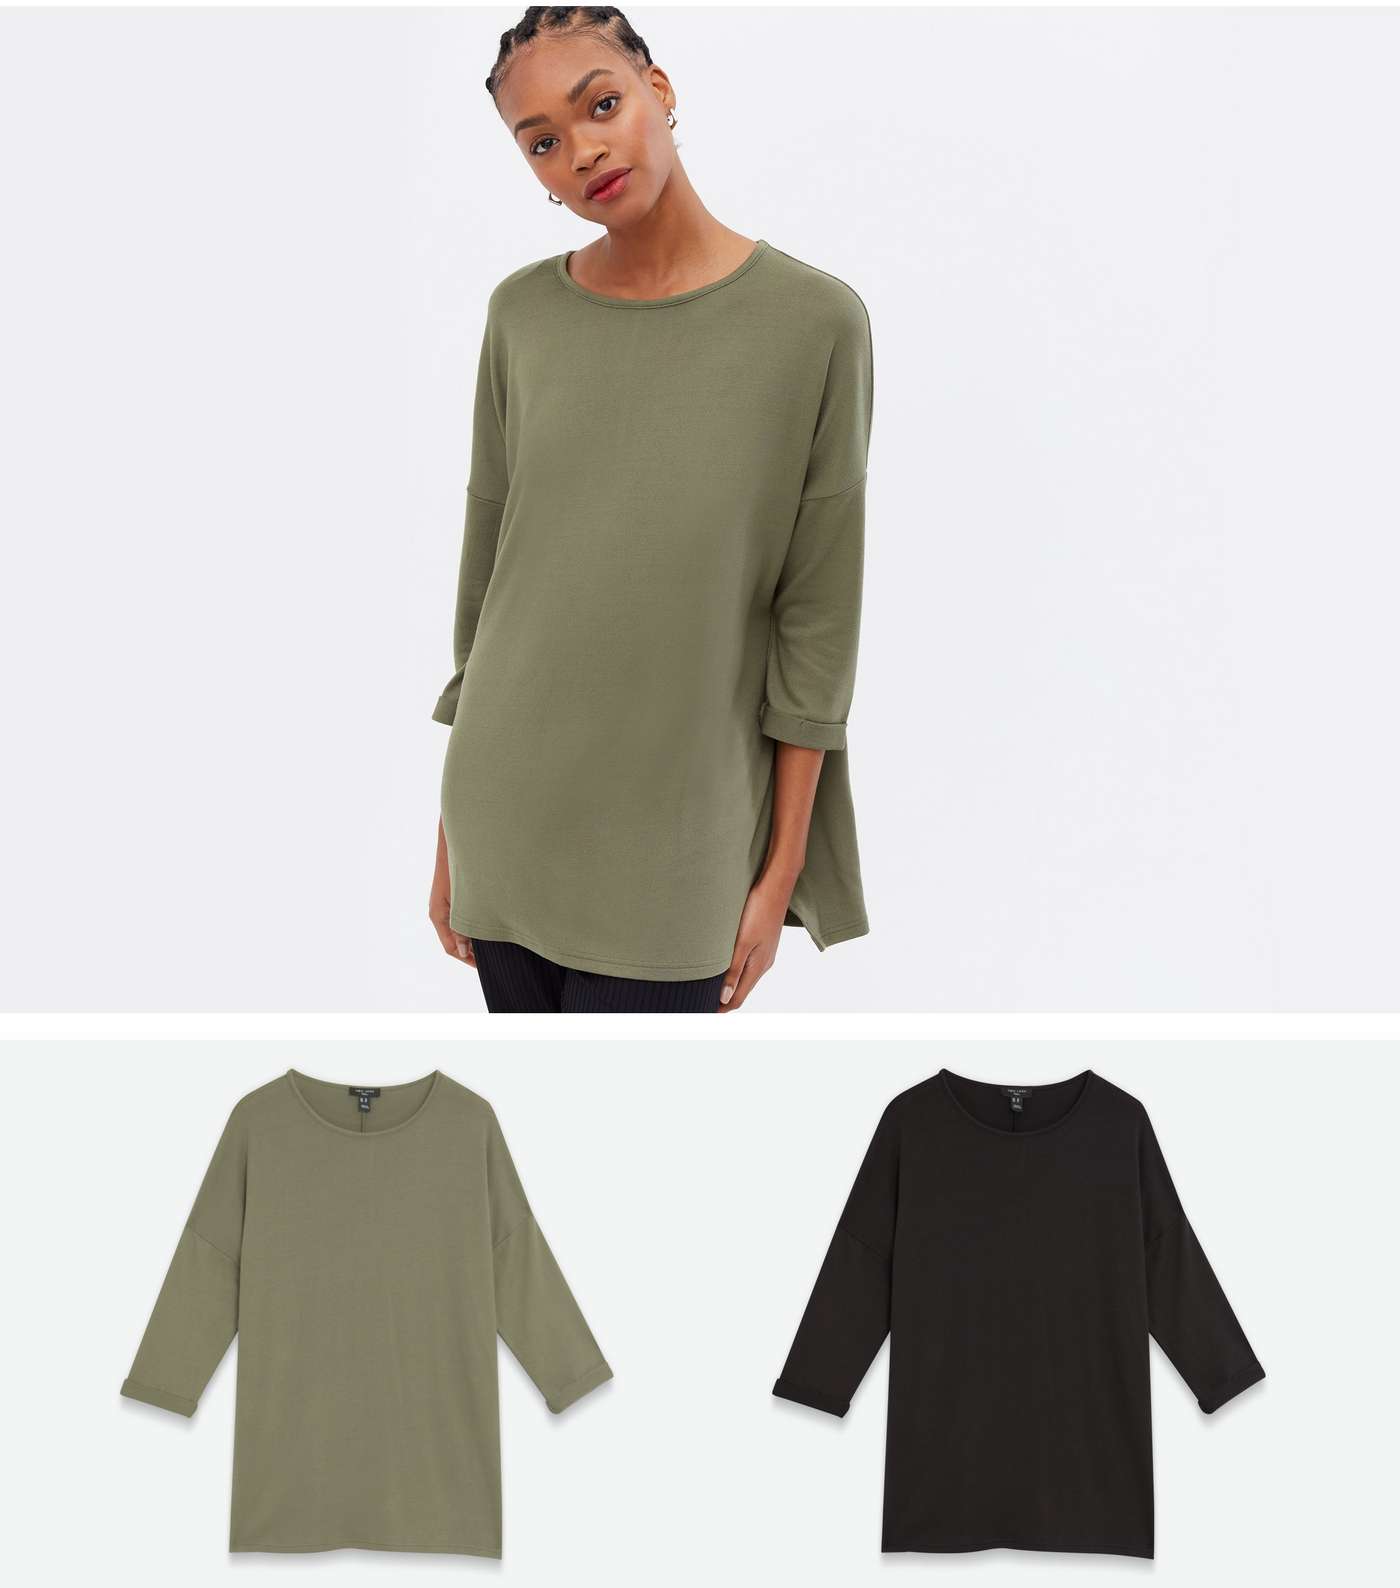 Tall 2 Pack Khaki and Black Fine Knit 3/4 Sleeve Long Tops